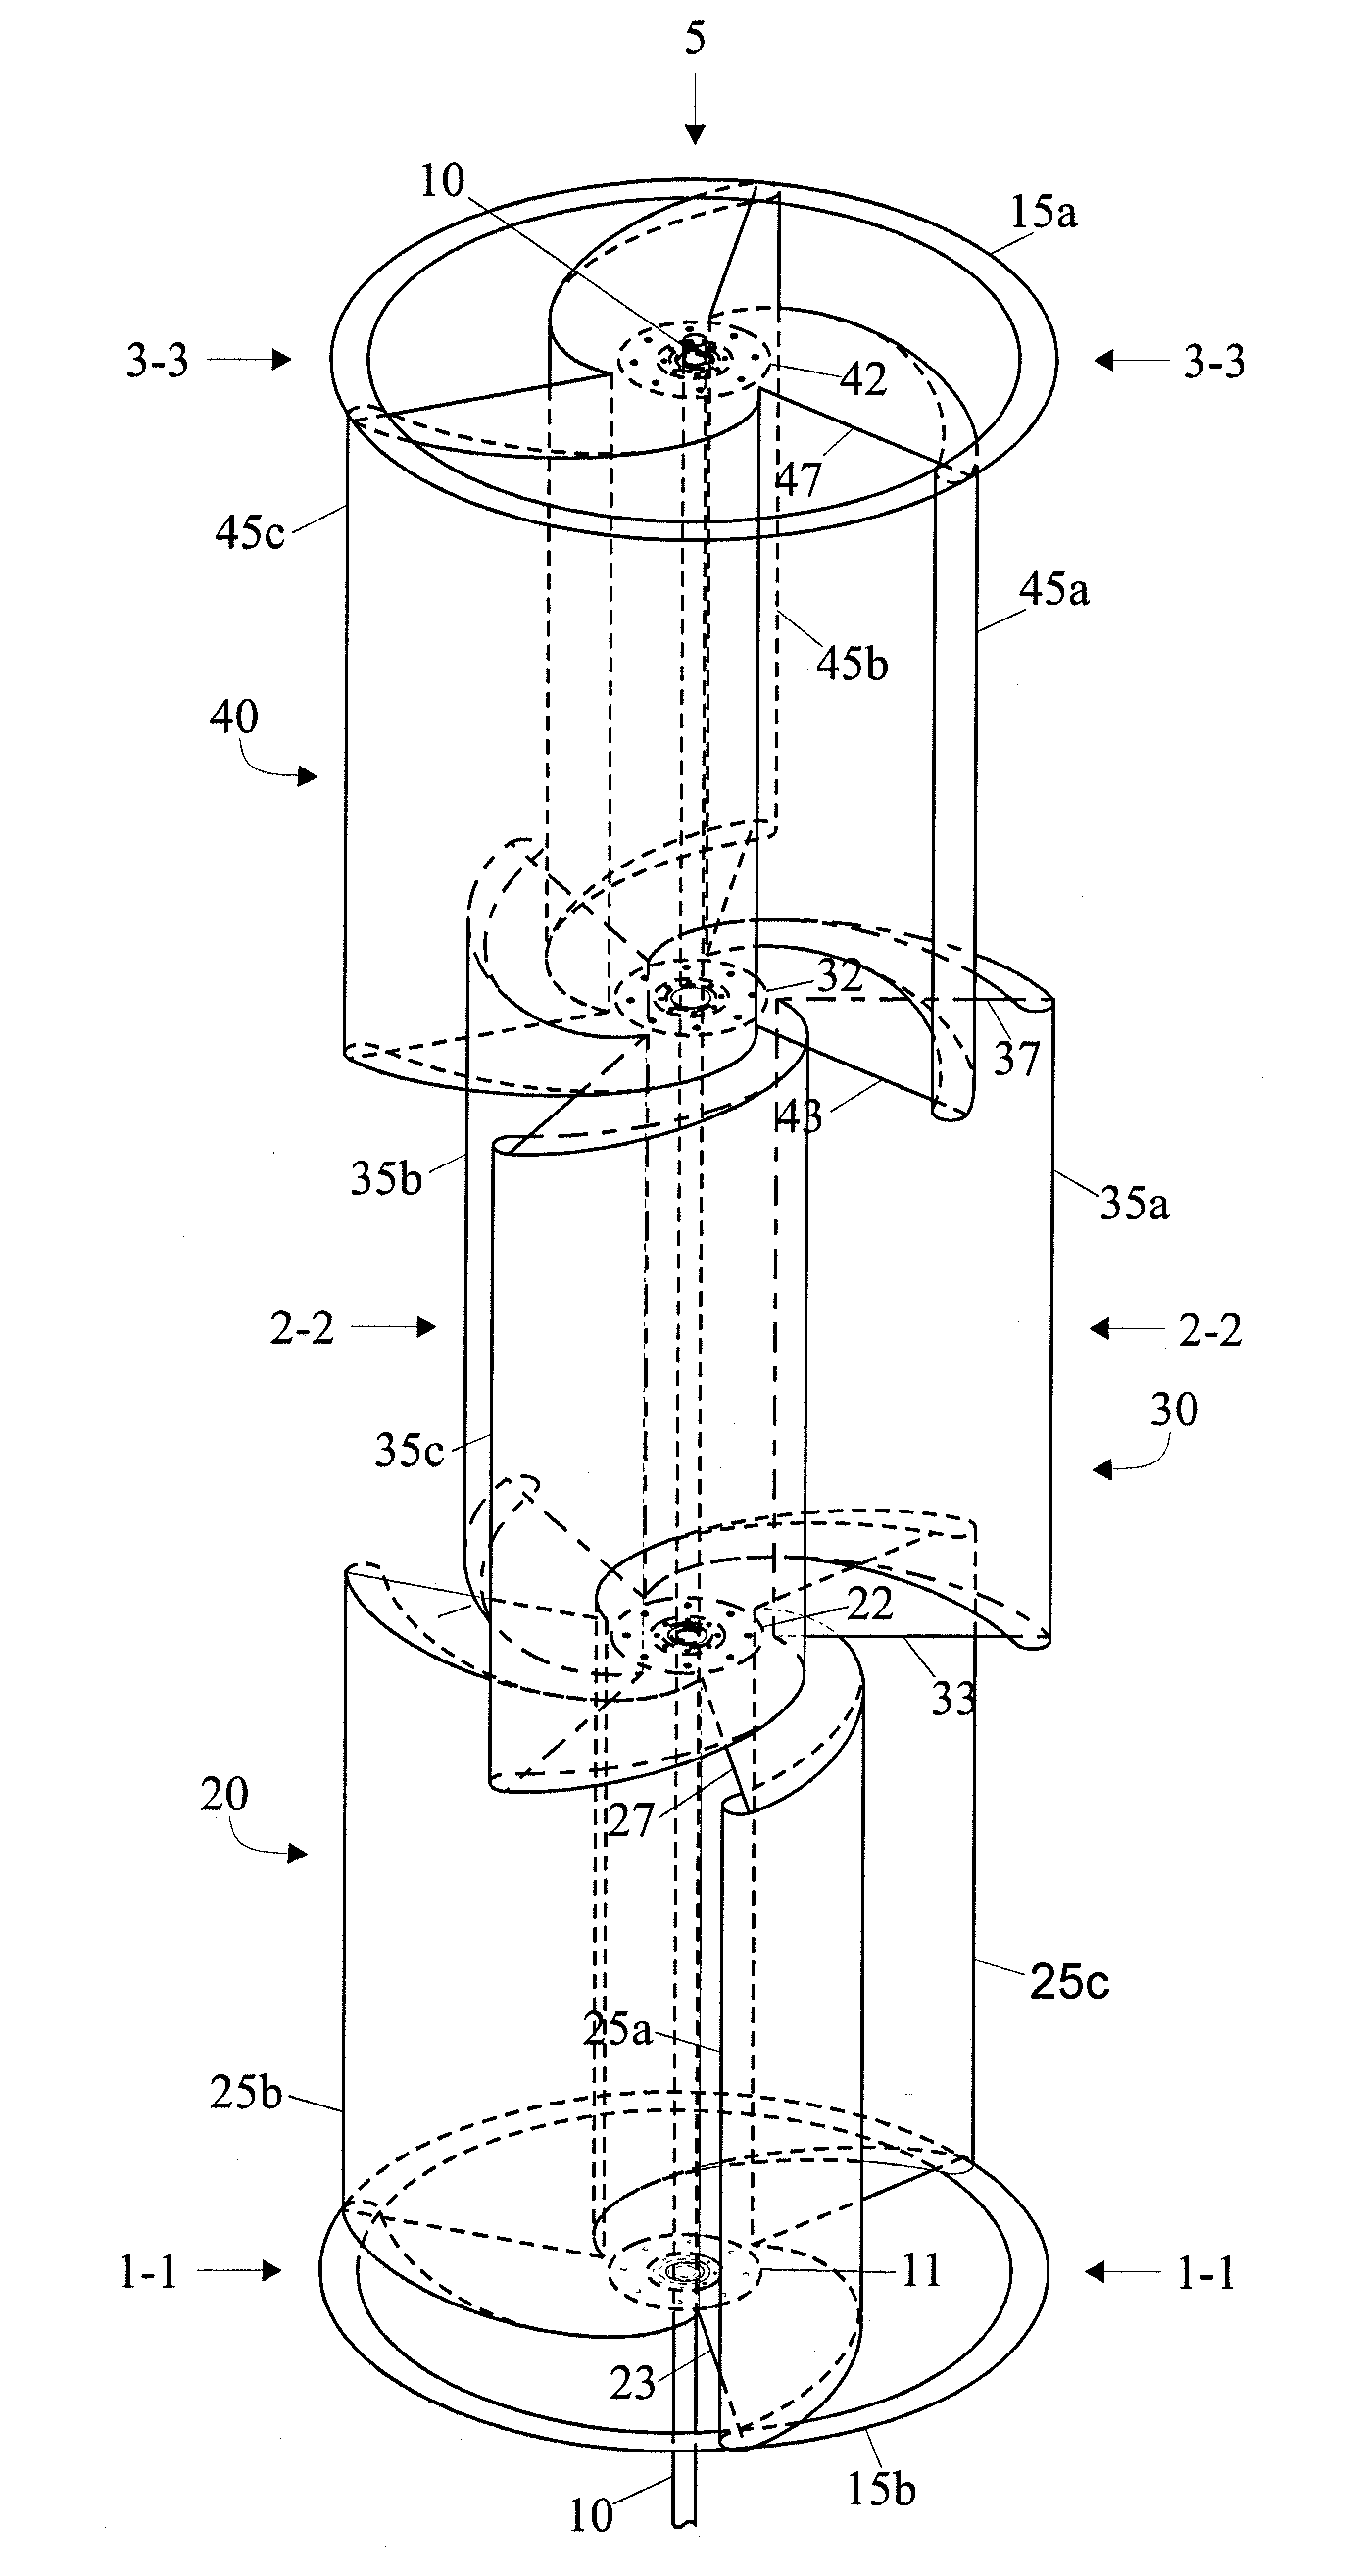 Vertical-axis wind turbine having logarithmic curved airfoils